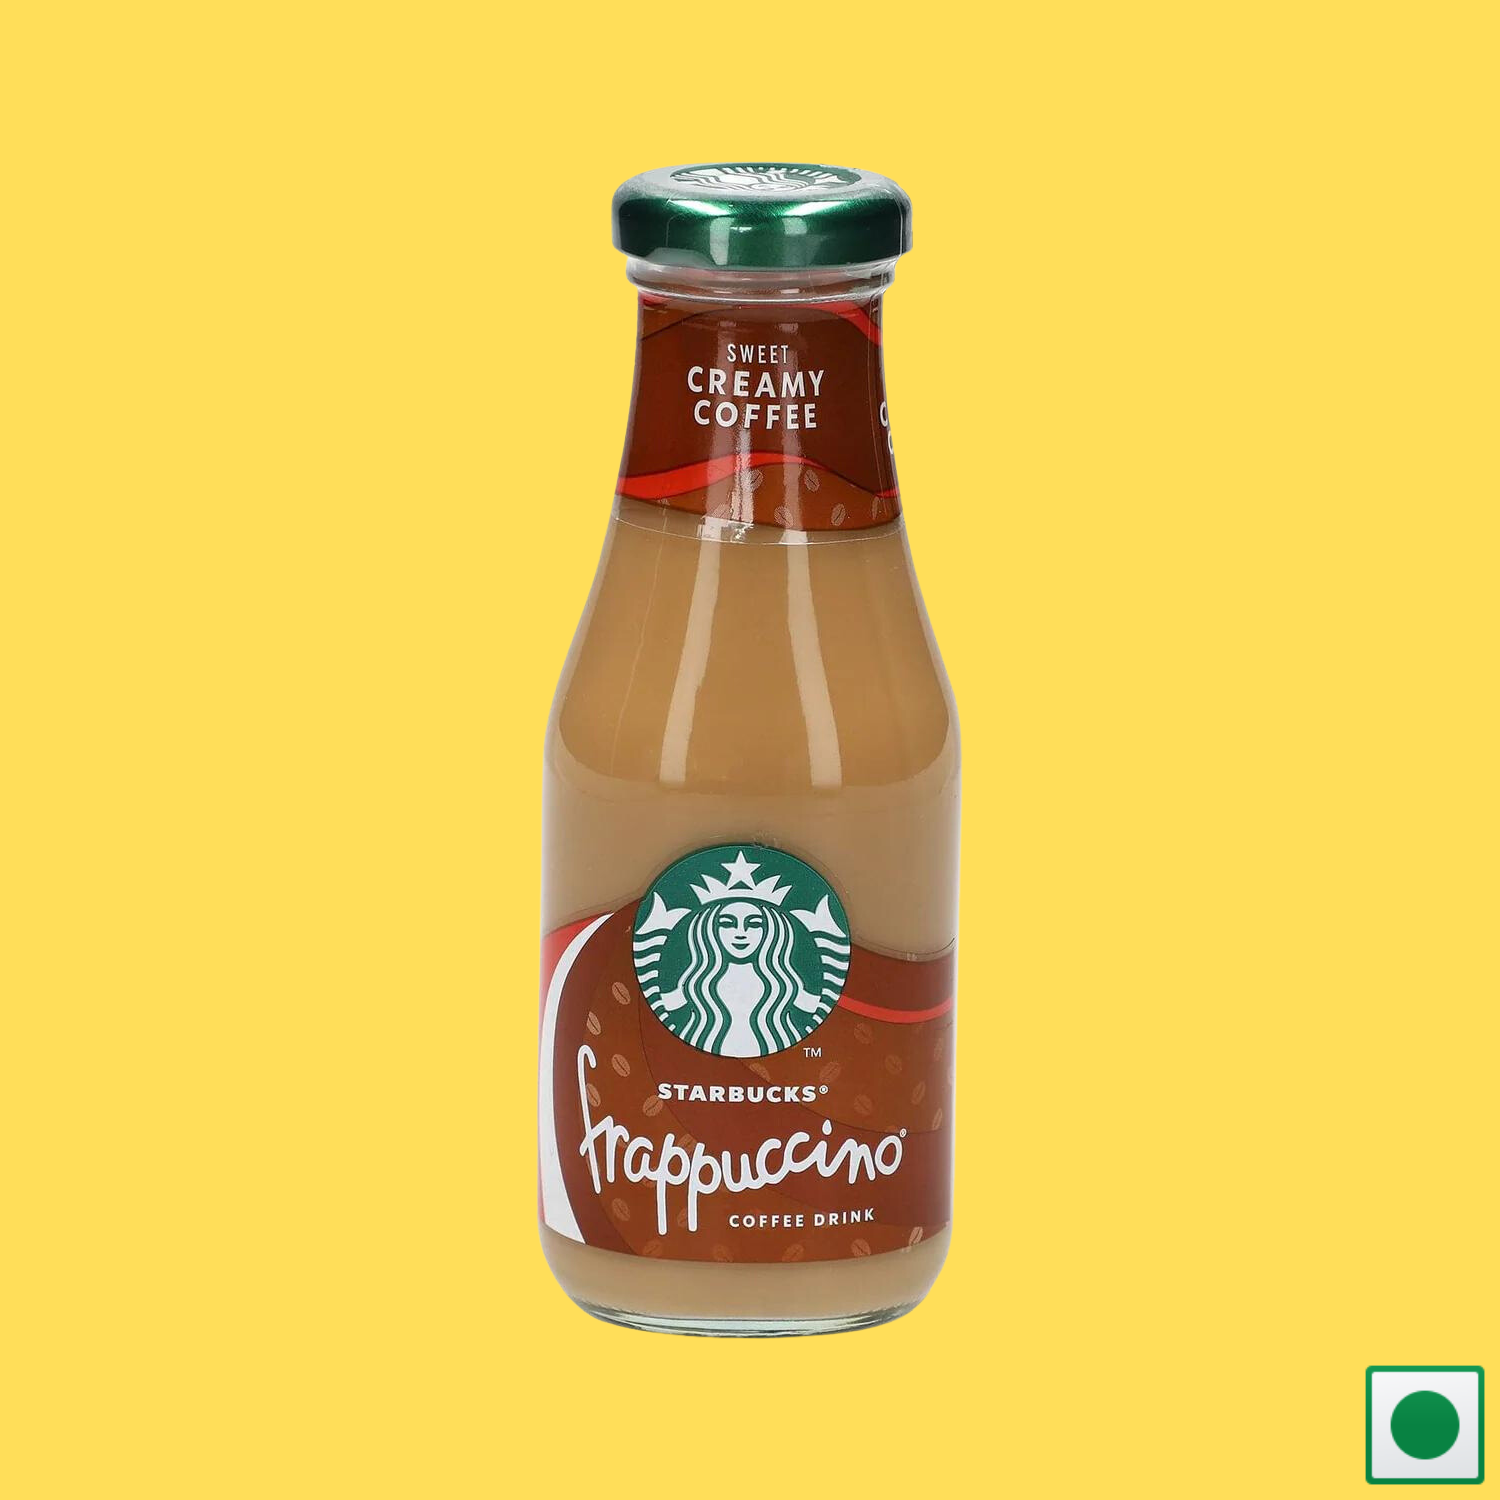 Starbucks Frappuccino Sweet Creamy Coffee Drink, 250ml (Imported)